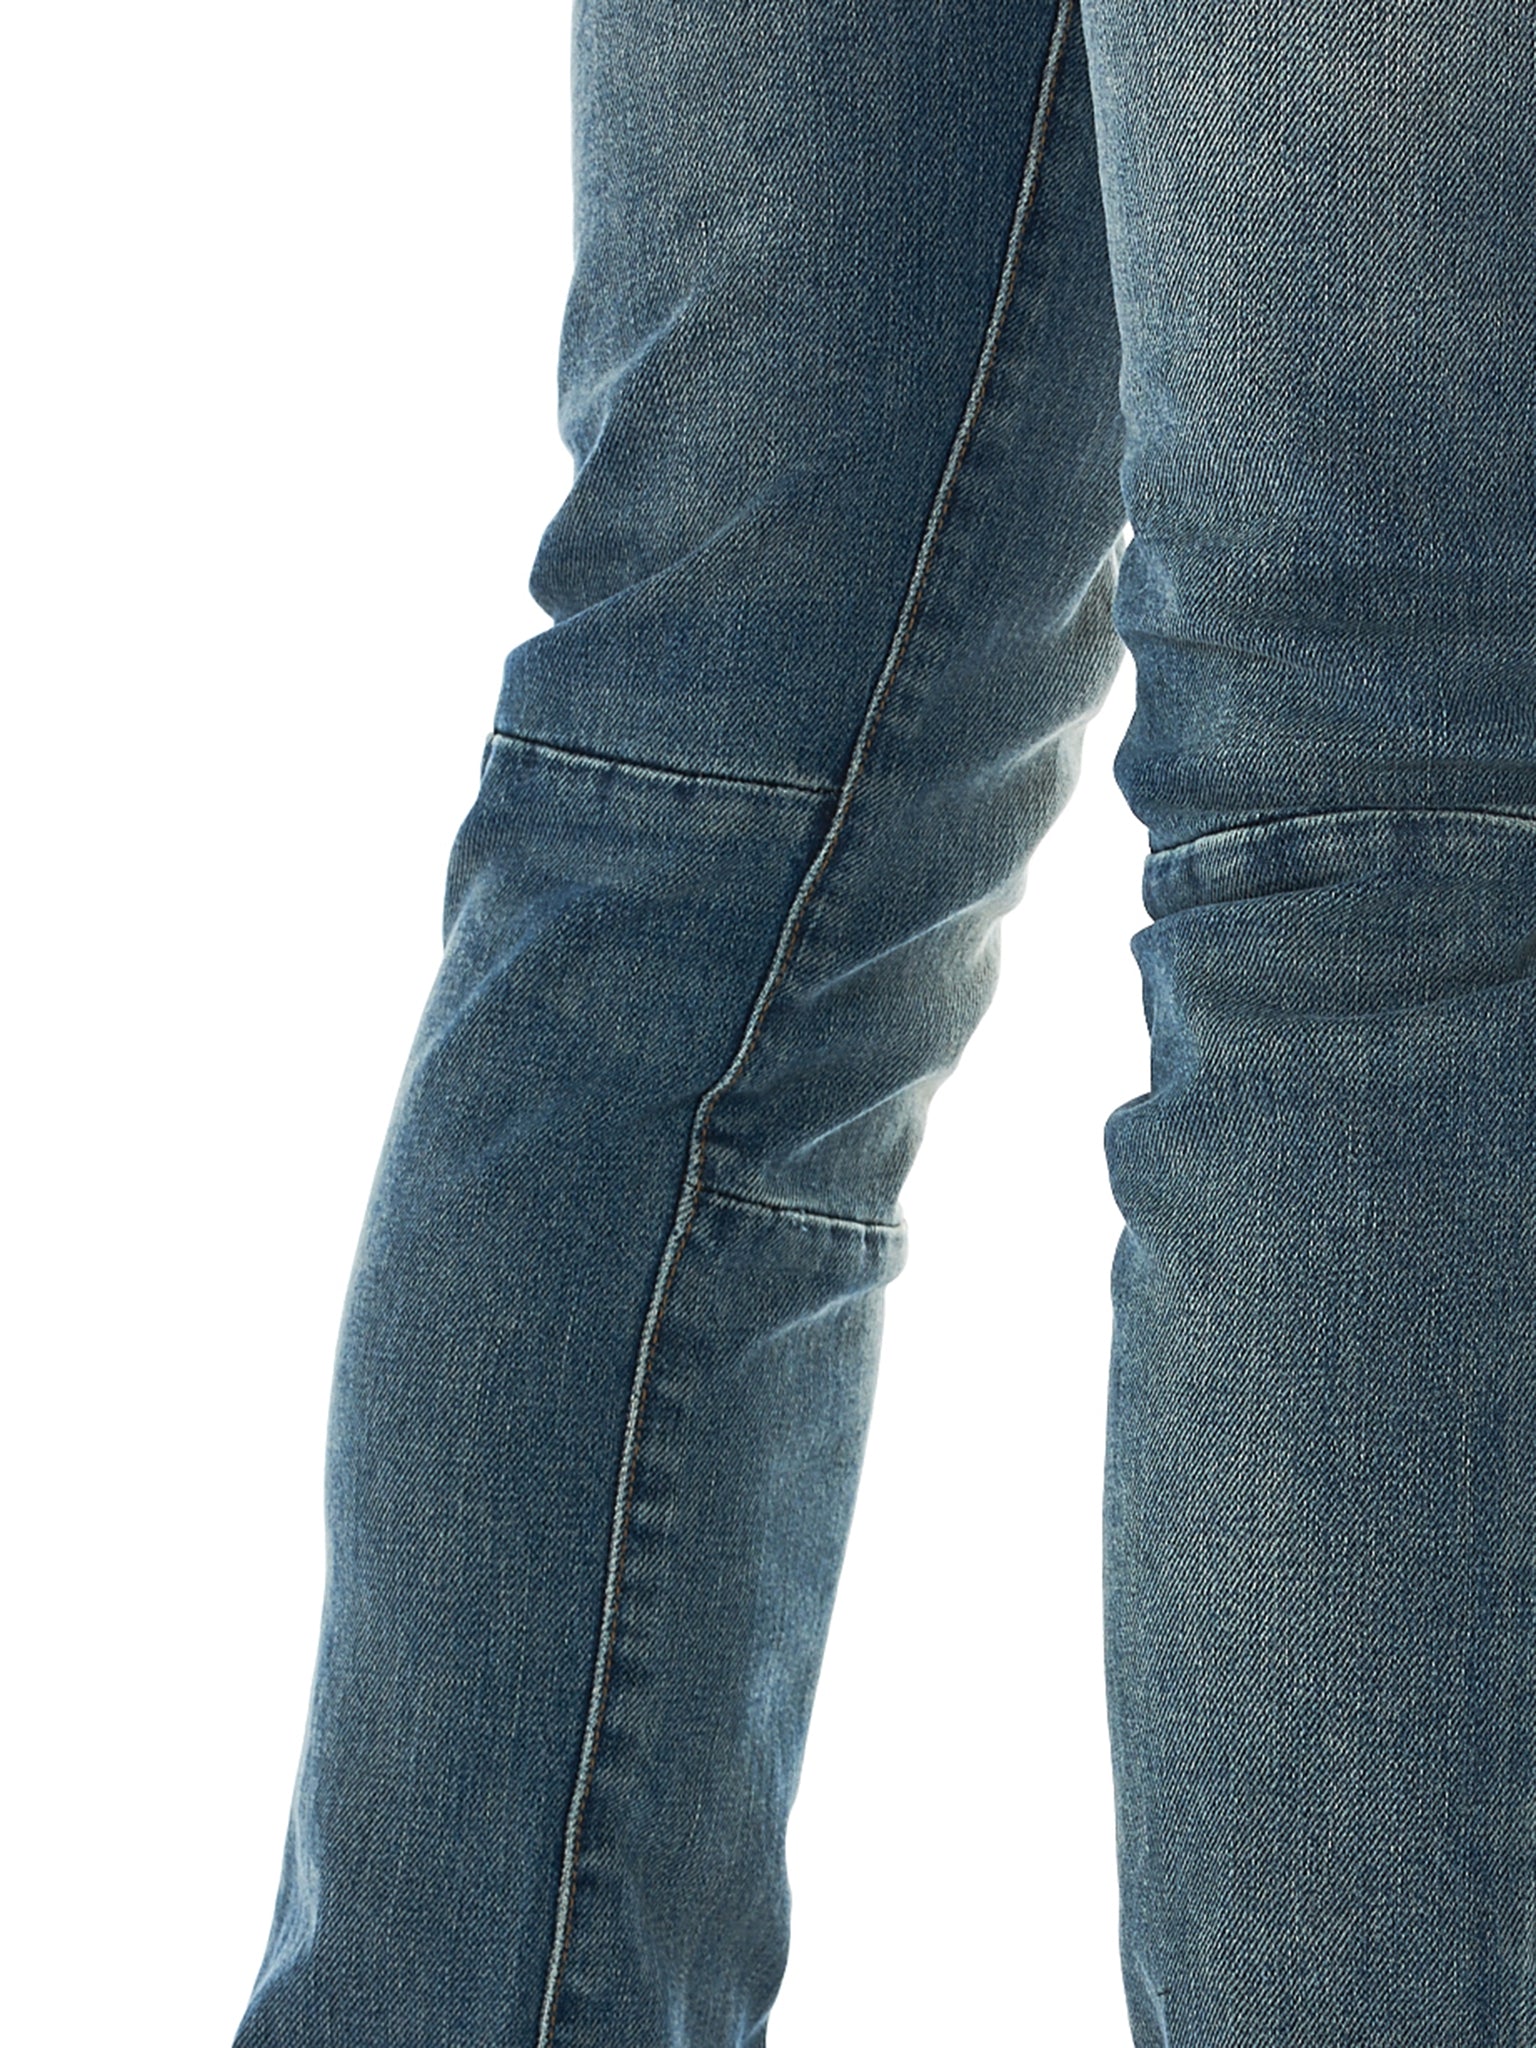 Unravel Distressed Jeans - Hlorenzo Detail 1